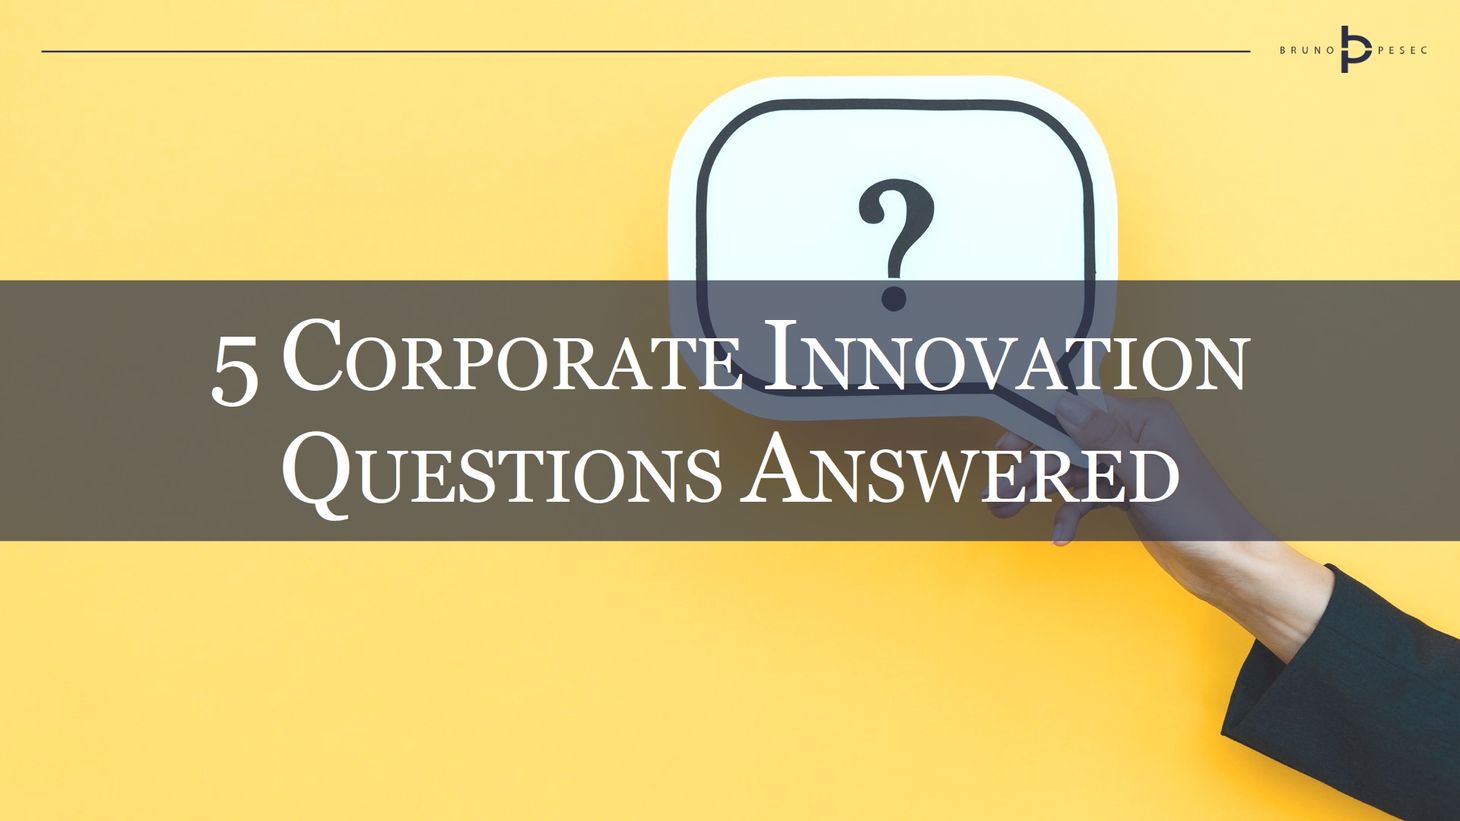 Five corporate innovation questions answered